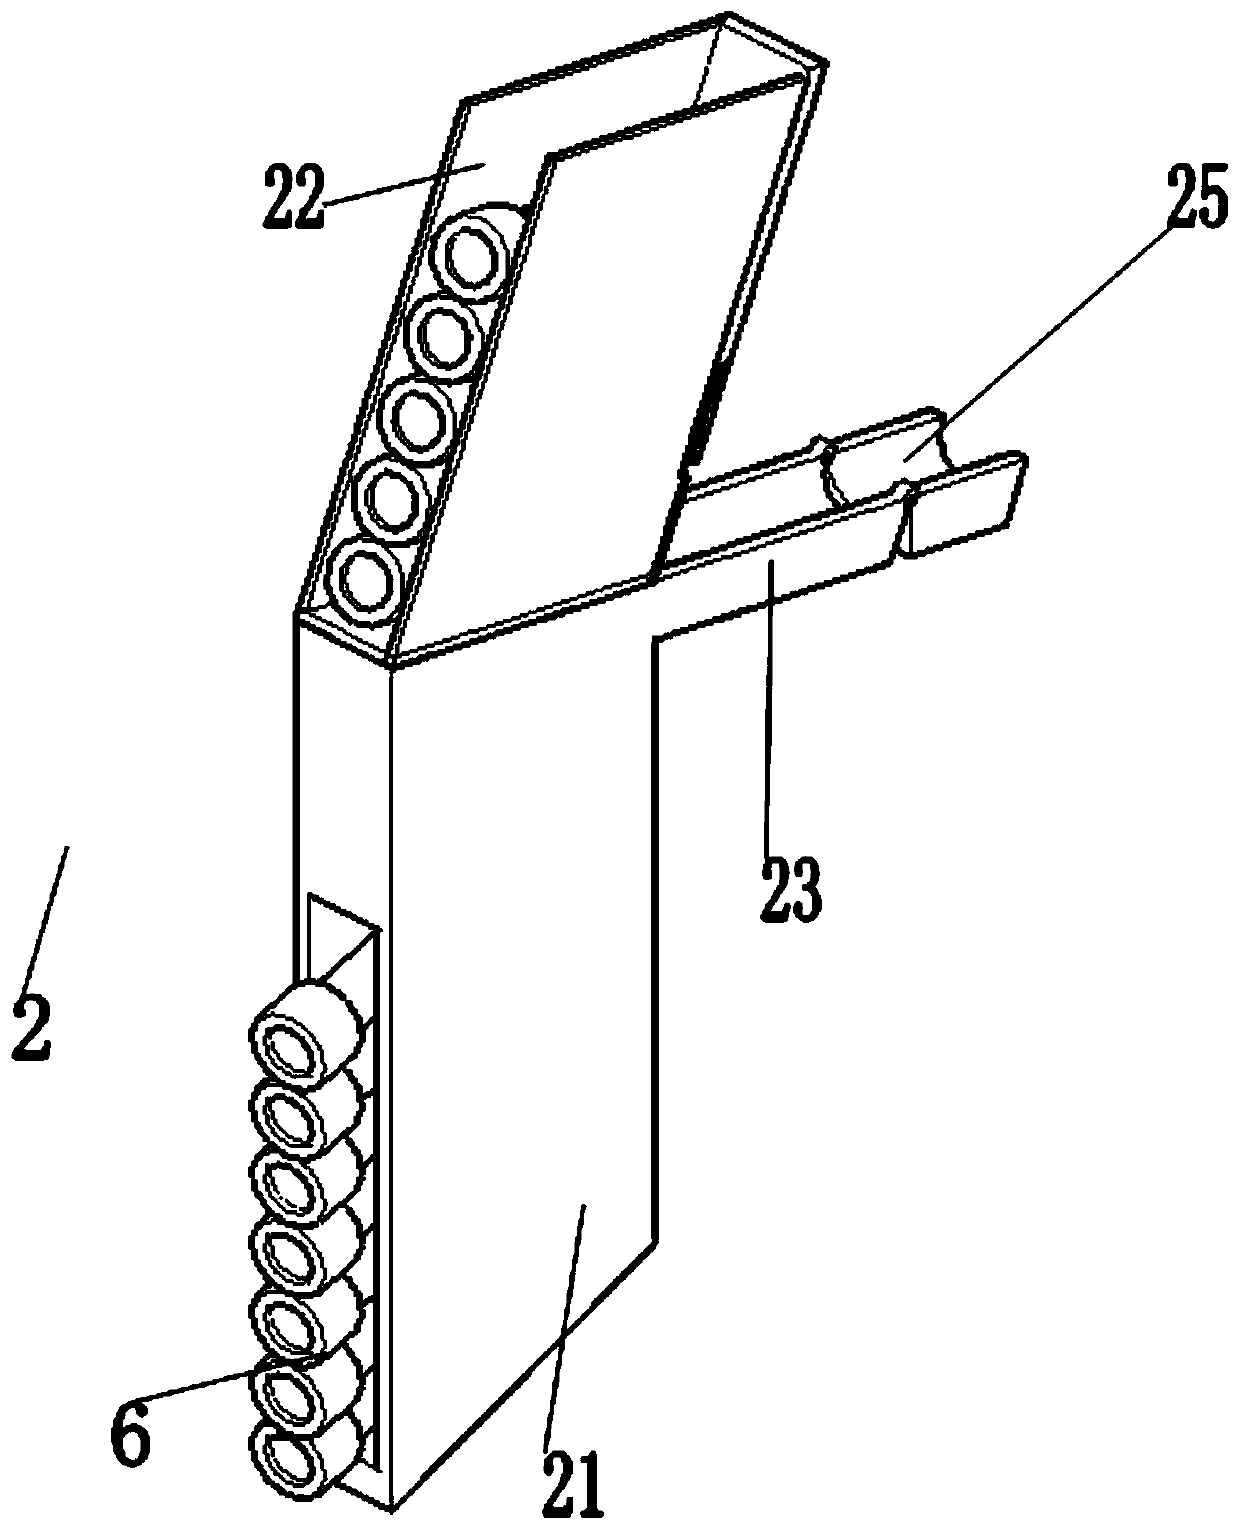 Automatic preparation device used for blood sampling pipes before blood sampling